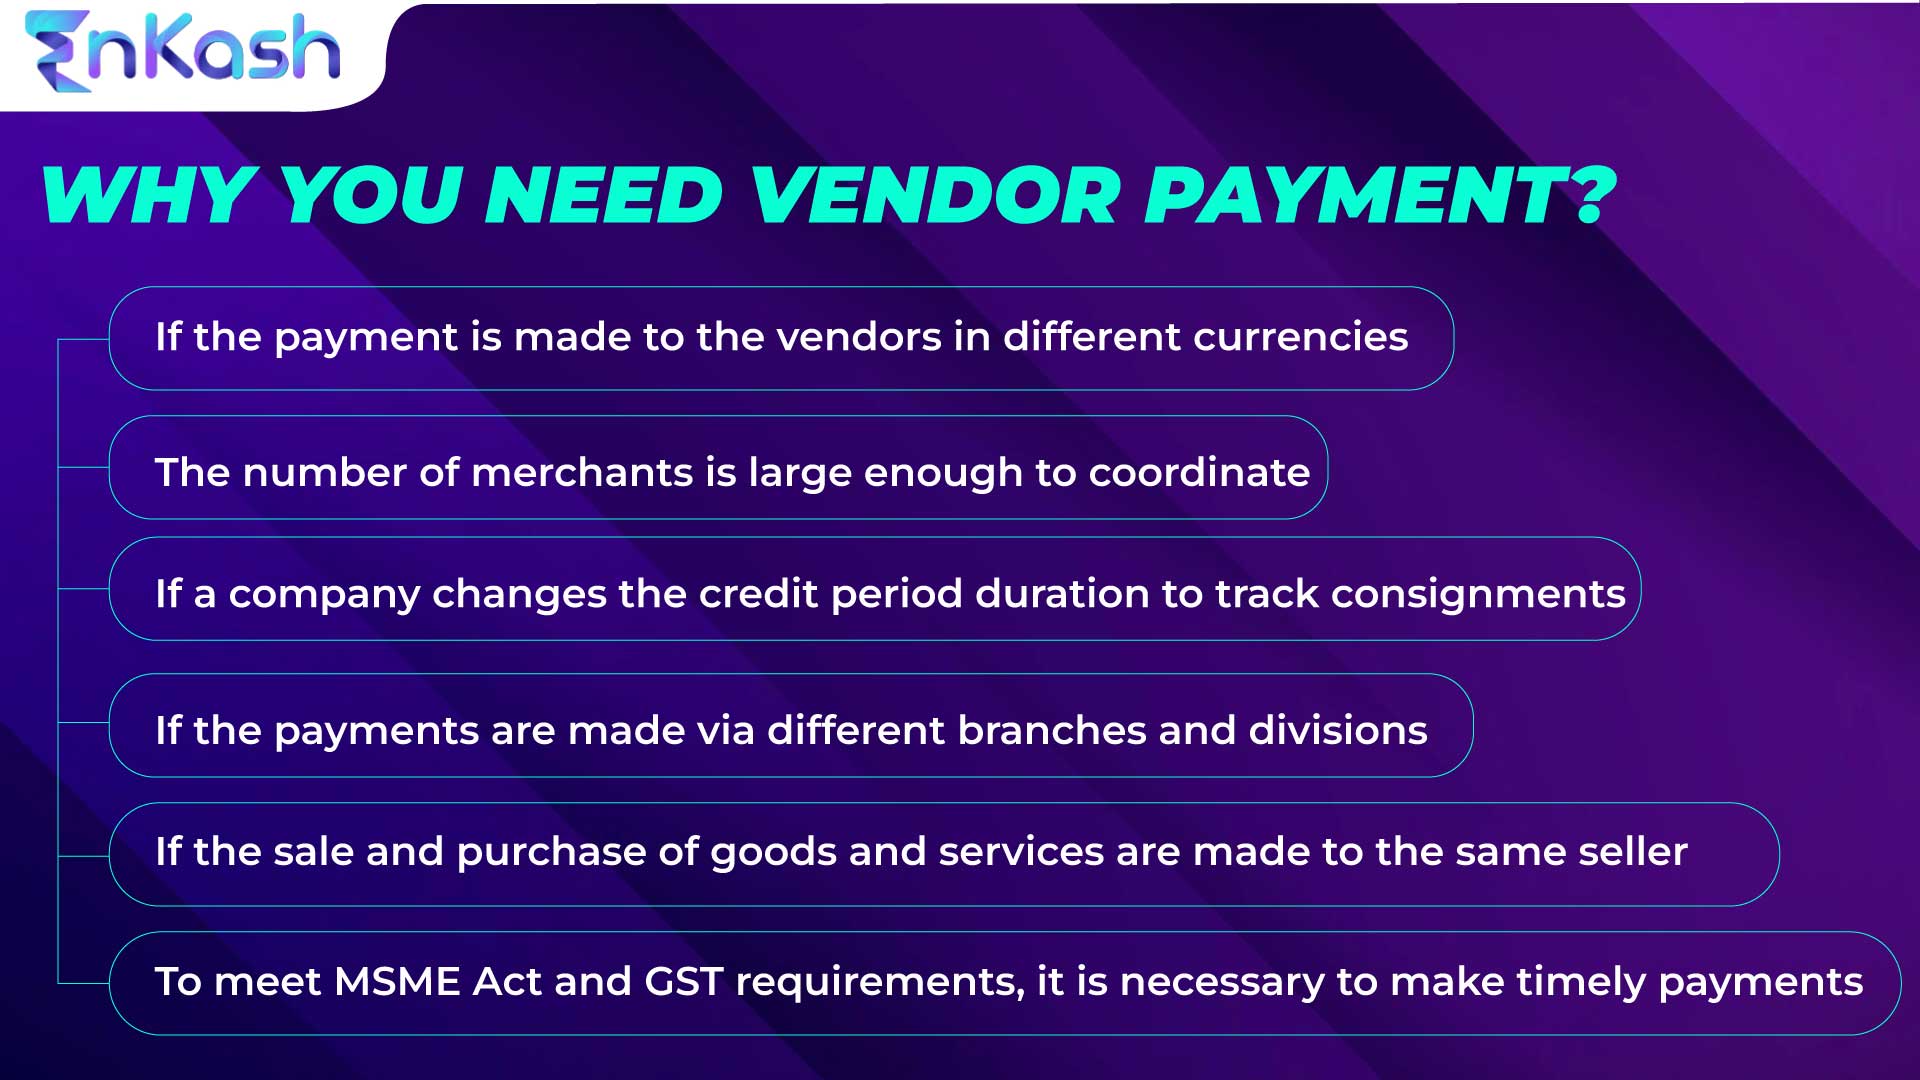 Why you need Vendor payment